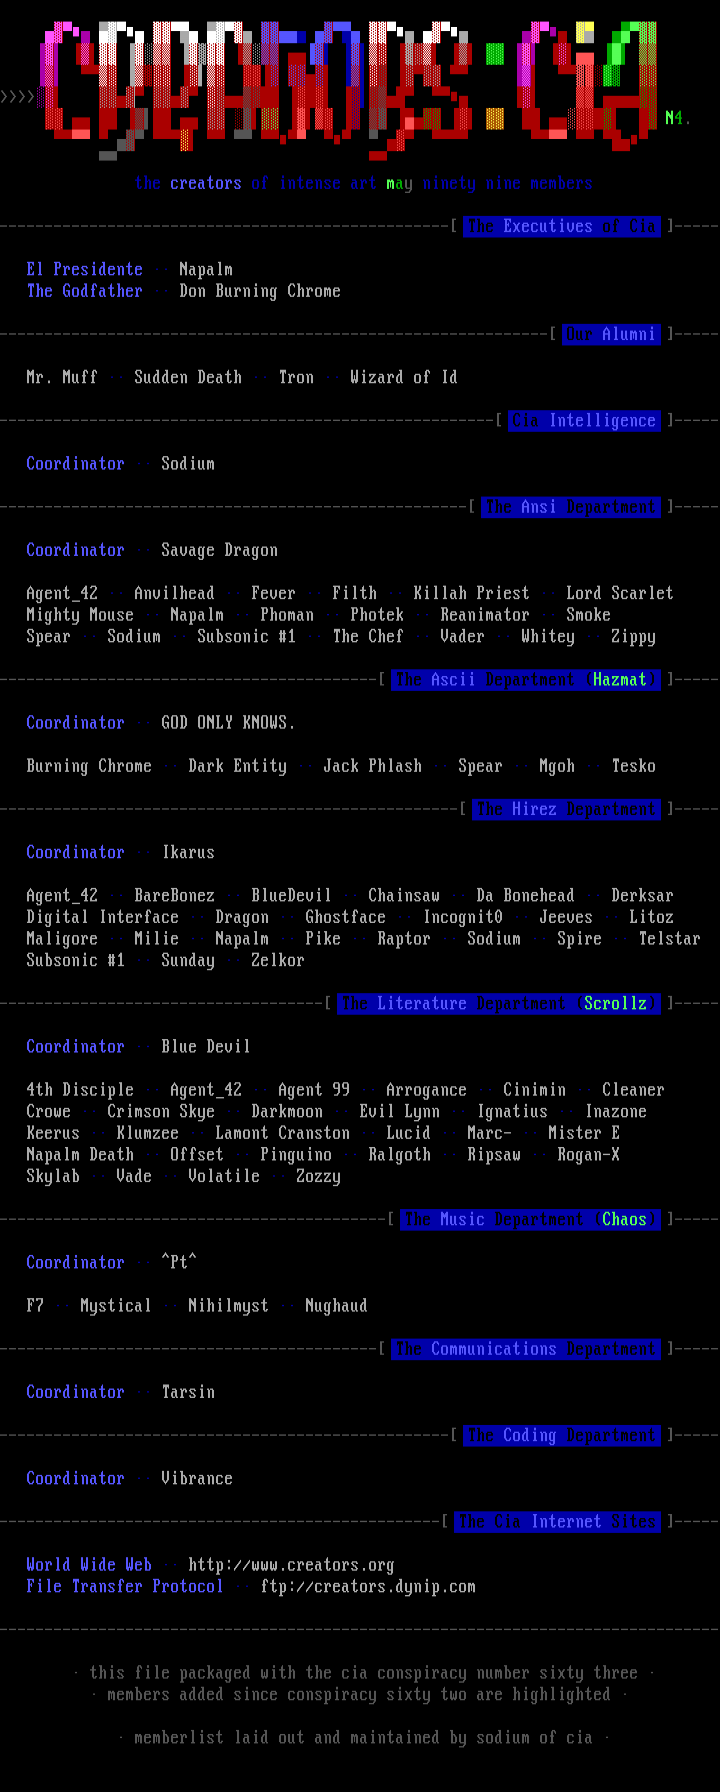 May 1999 Member Listing by Cia Intelligence